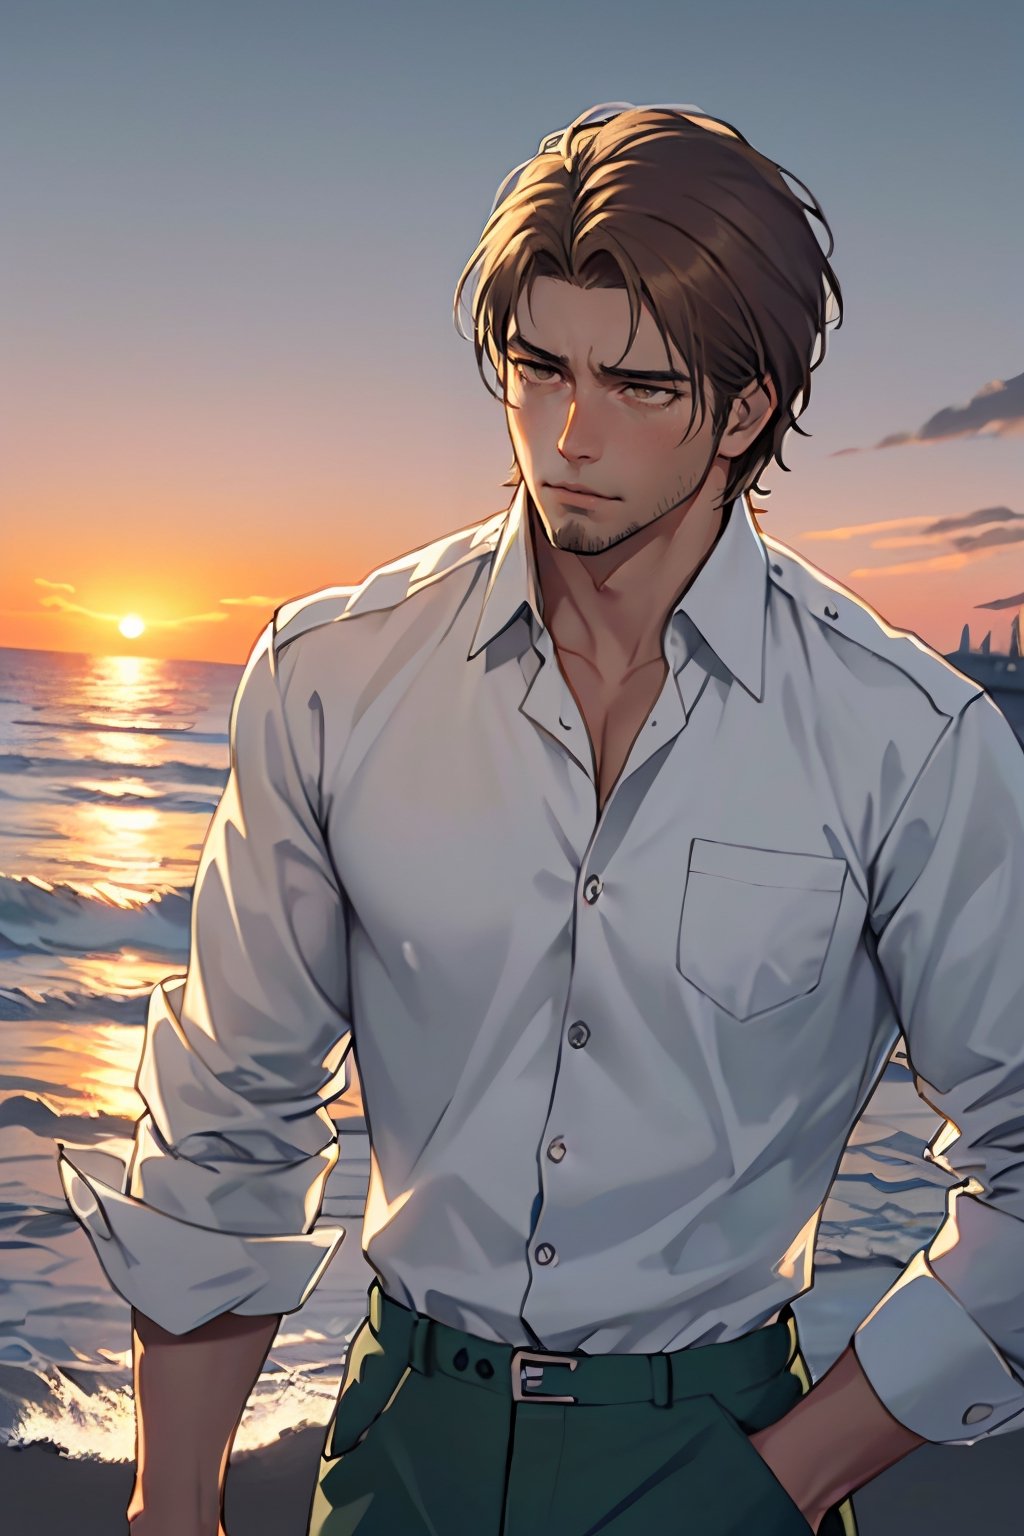 jean_kirstein(brown hair, short hair, stubble, bare forehead:1.2), (light brown eyes:1.4), fit body, (wearing pure white collared shirt, button up shirt:1.3), military green pants, black combat boots:1.2), roll up sleeve, manly, bulky, charming, alluring, dejected, depressed, sad, (standing), (upper body in frame), simple background(1910s harbor, sunset on ocean, endless ocean, nightfall), backlight, orange sky, perfect light, only 1 image, perfect anatomy, perfect proportions, perfect perspective, 8k, HQ, (best quality:1.5, hyperrealistic:1.5, photorealistic:1.4, madly detailed CG unity 8k wallpaper:1.5, masterpiece:1.3, madly detailed photo:1.2), (hyper-realistic lifelike texture:1.4, realistic eyes:1.2), picture-perfect face, detailed eyes, realistic, HD, UHD, front view, tear in eyes